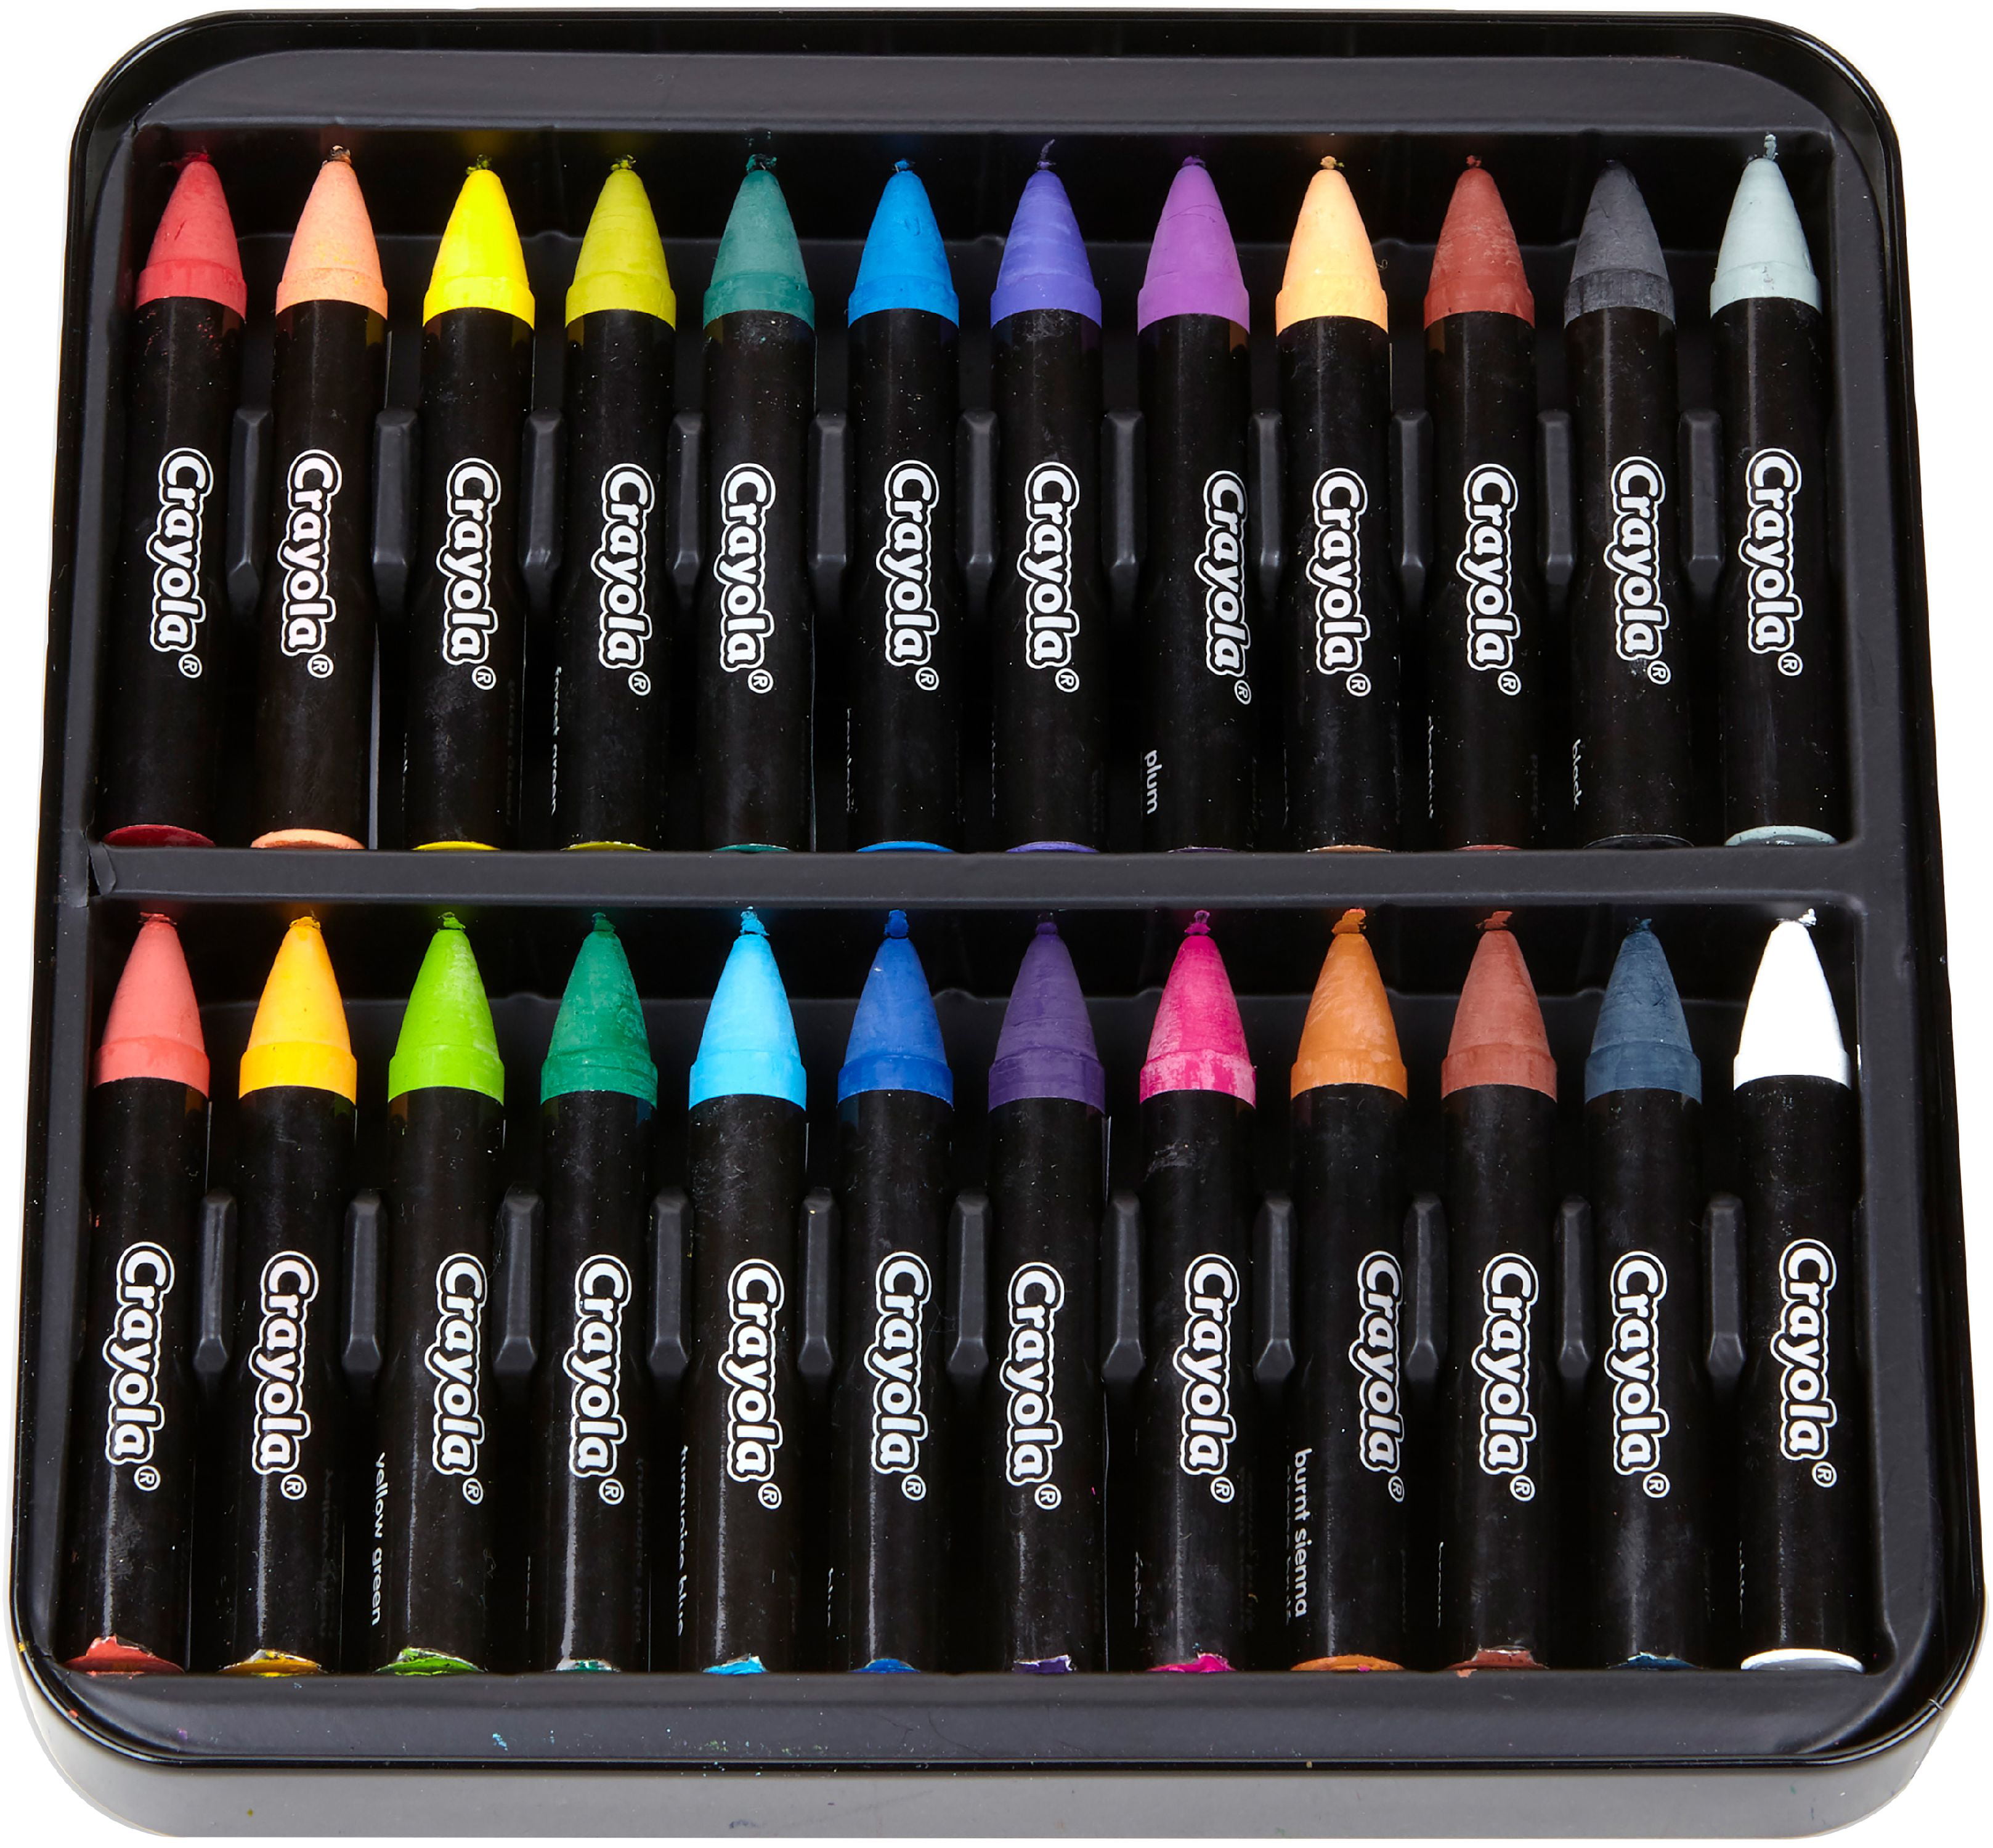 Crayola® Portfolio® Series 24 Color Water-Soluble Oil Pastels